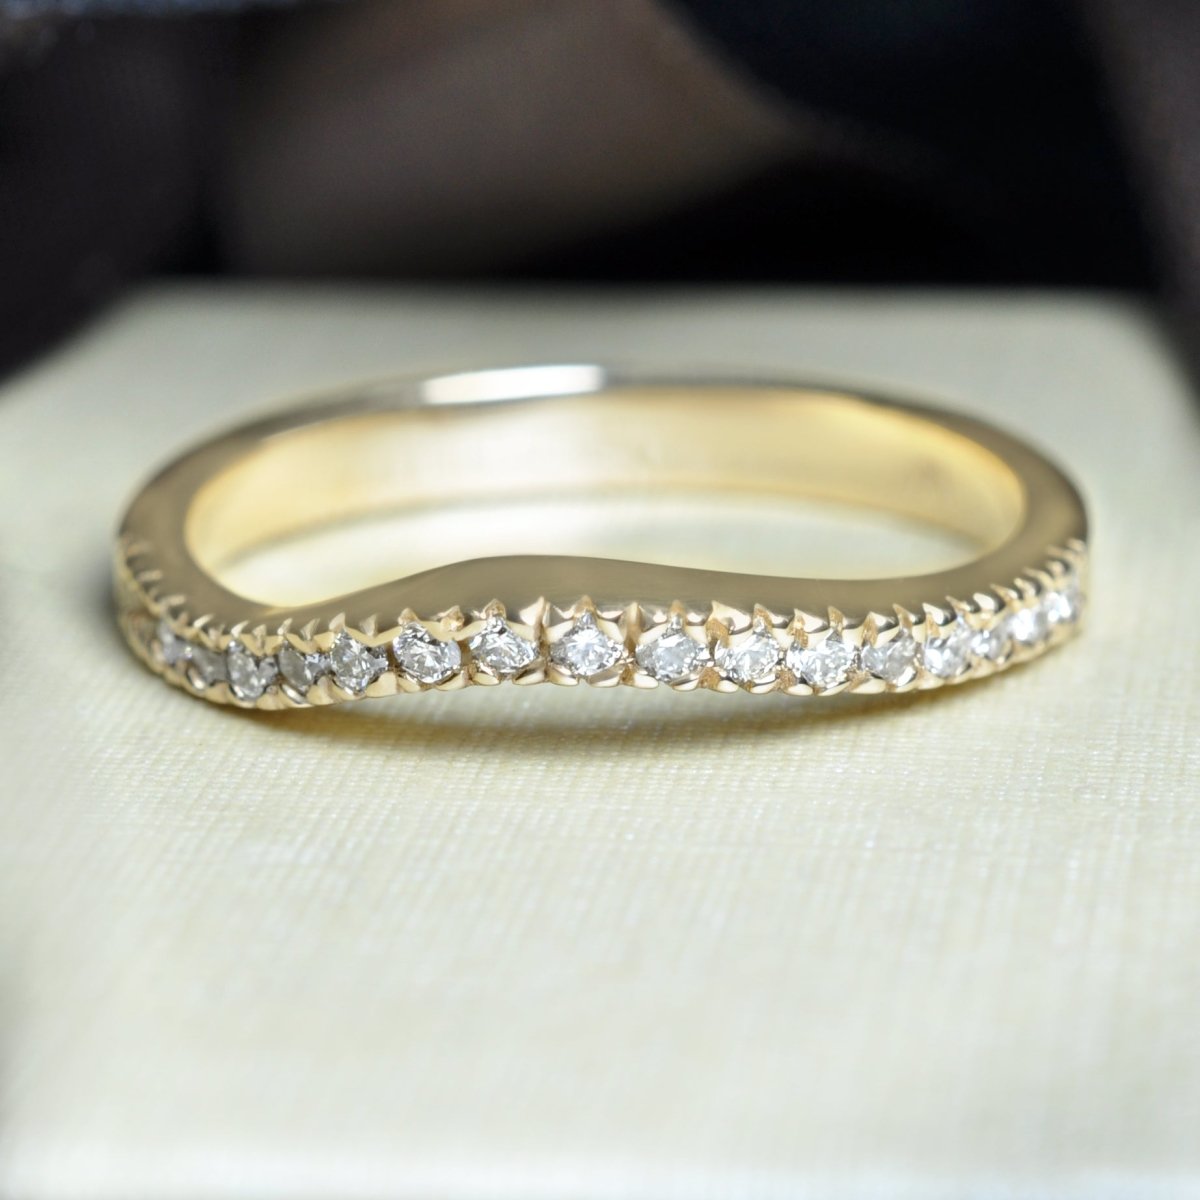 Risk-Free 0.30 CT Round Cut Diamond Wedding Band in 14KT Yellow Gold - Primestyle.com